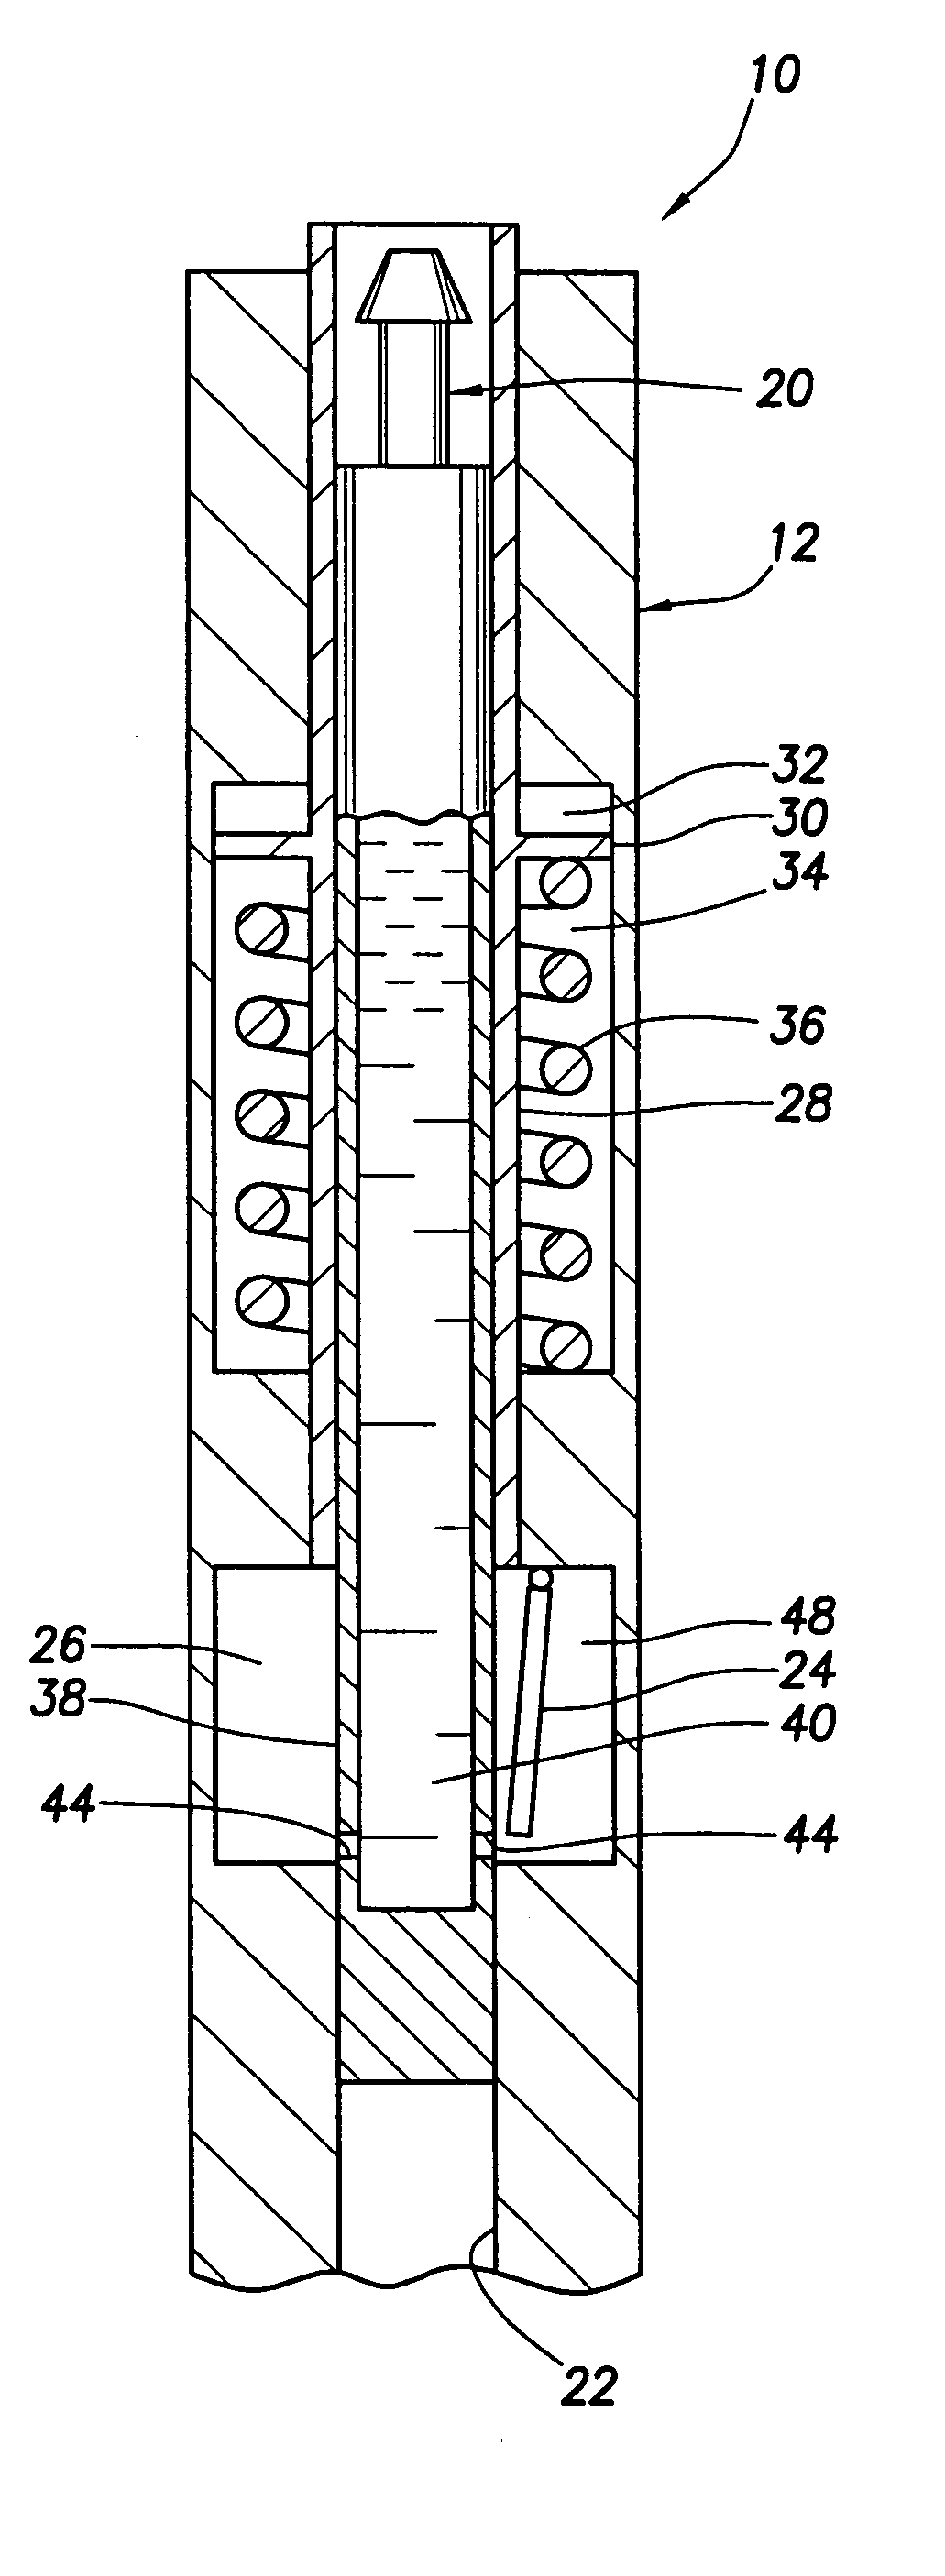 Safety valve lock out system and method